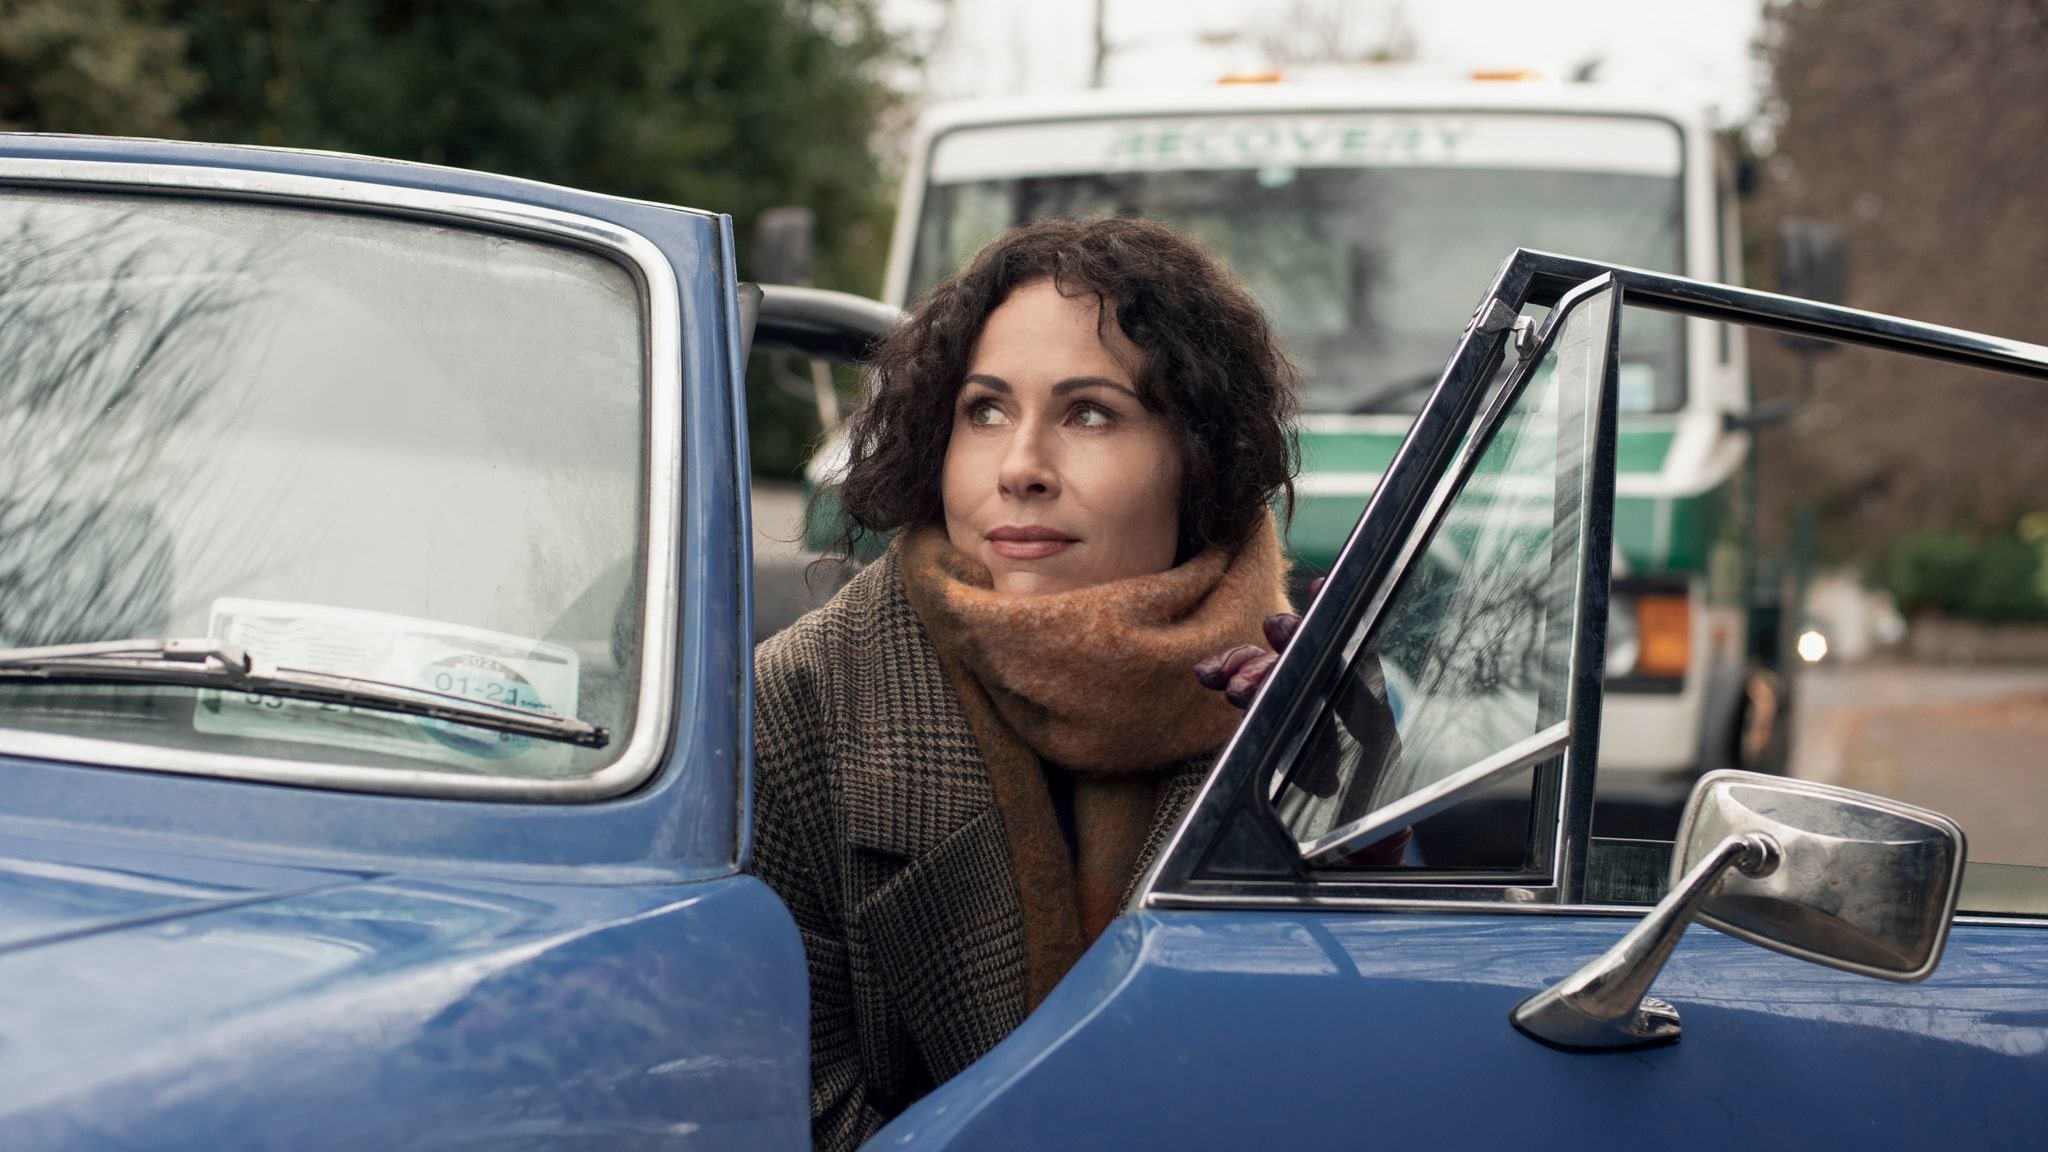 Minnie Driver in Episode 1: “On a Serpentine Road, With the Top Down”